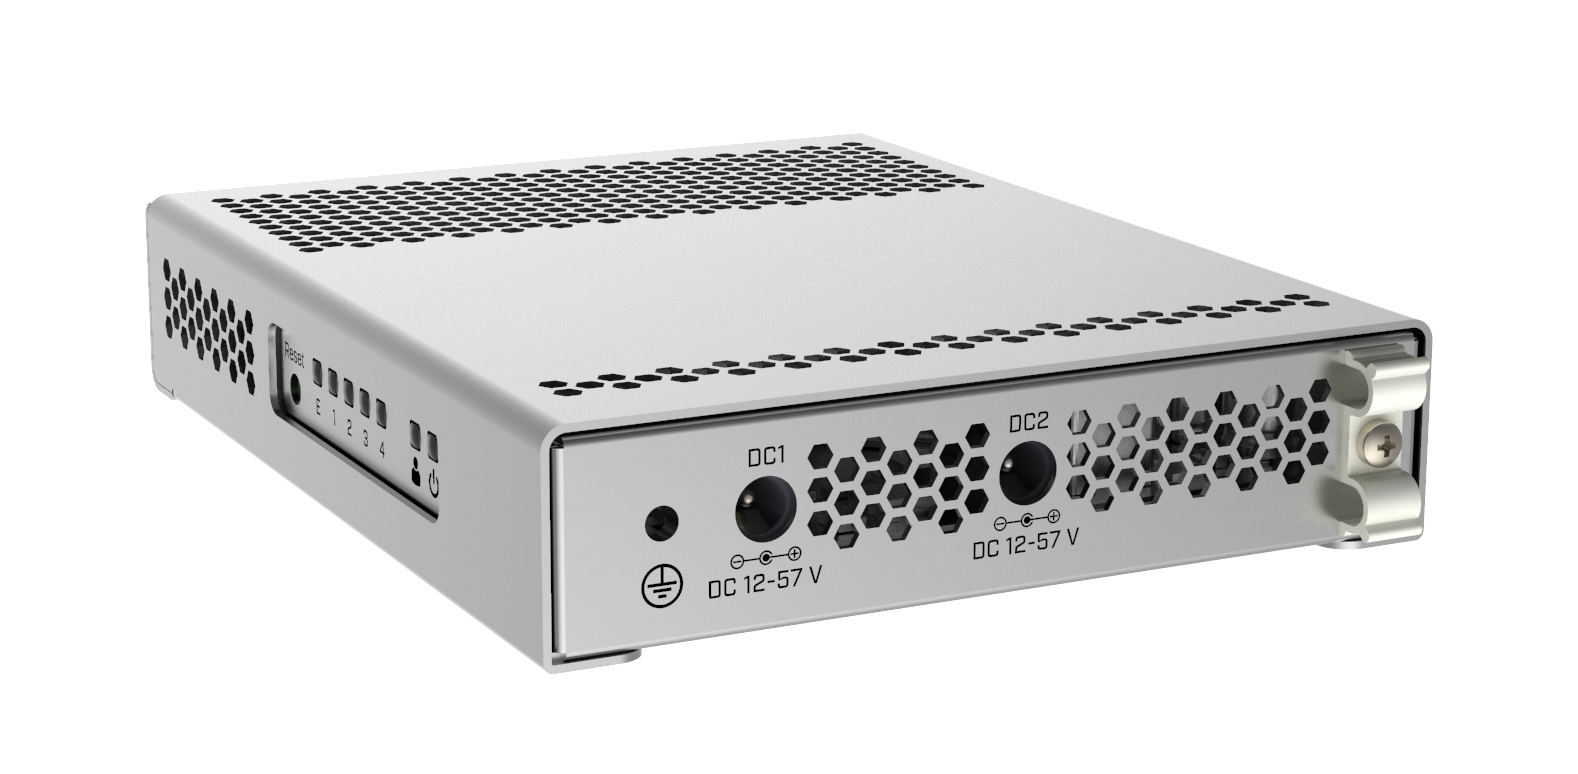 MikroTik Cloud Smart Switch CRS305-1G-4S+IN